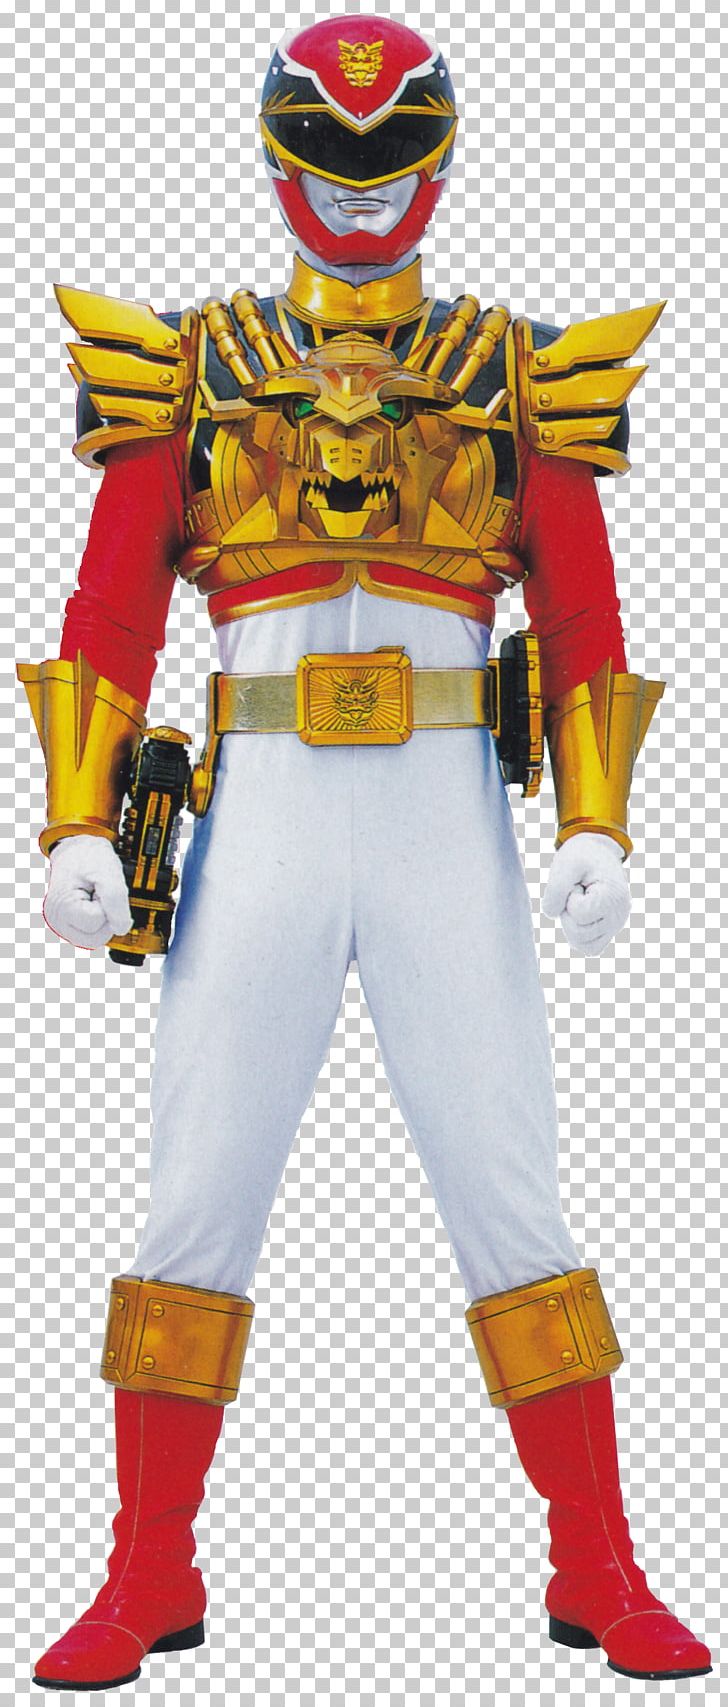 Jason Lee Scott Alata Red Ranger Troy Burrows Wikia PNG, Clipart, Action Figure, Comic, Costume, Fictional Character, Figurine Free PNG Download